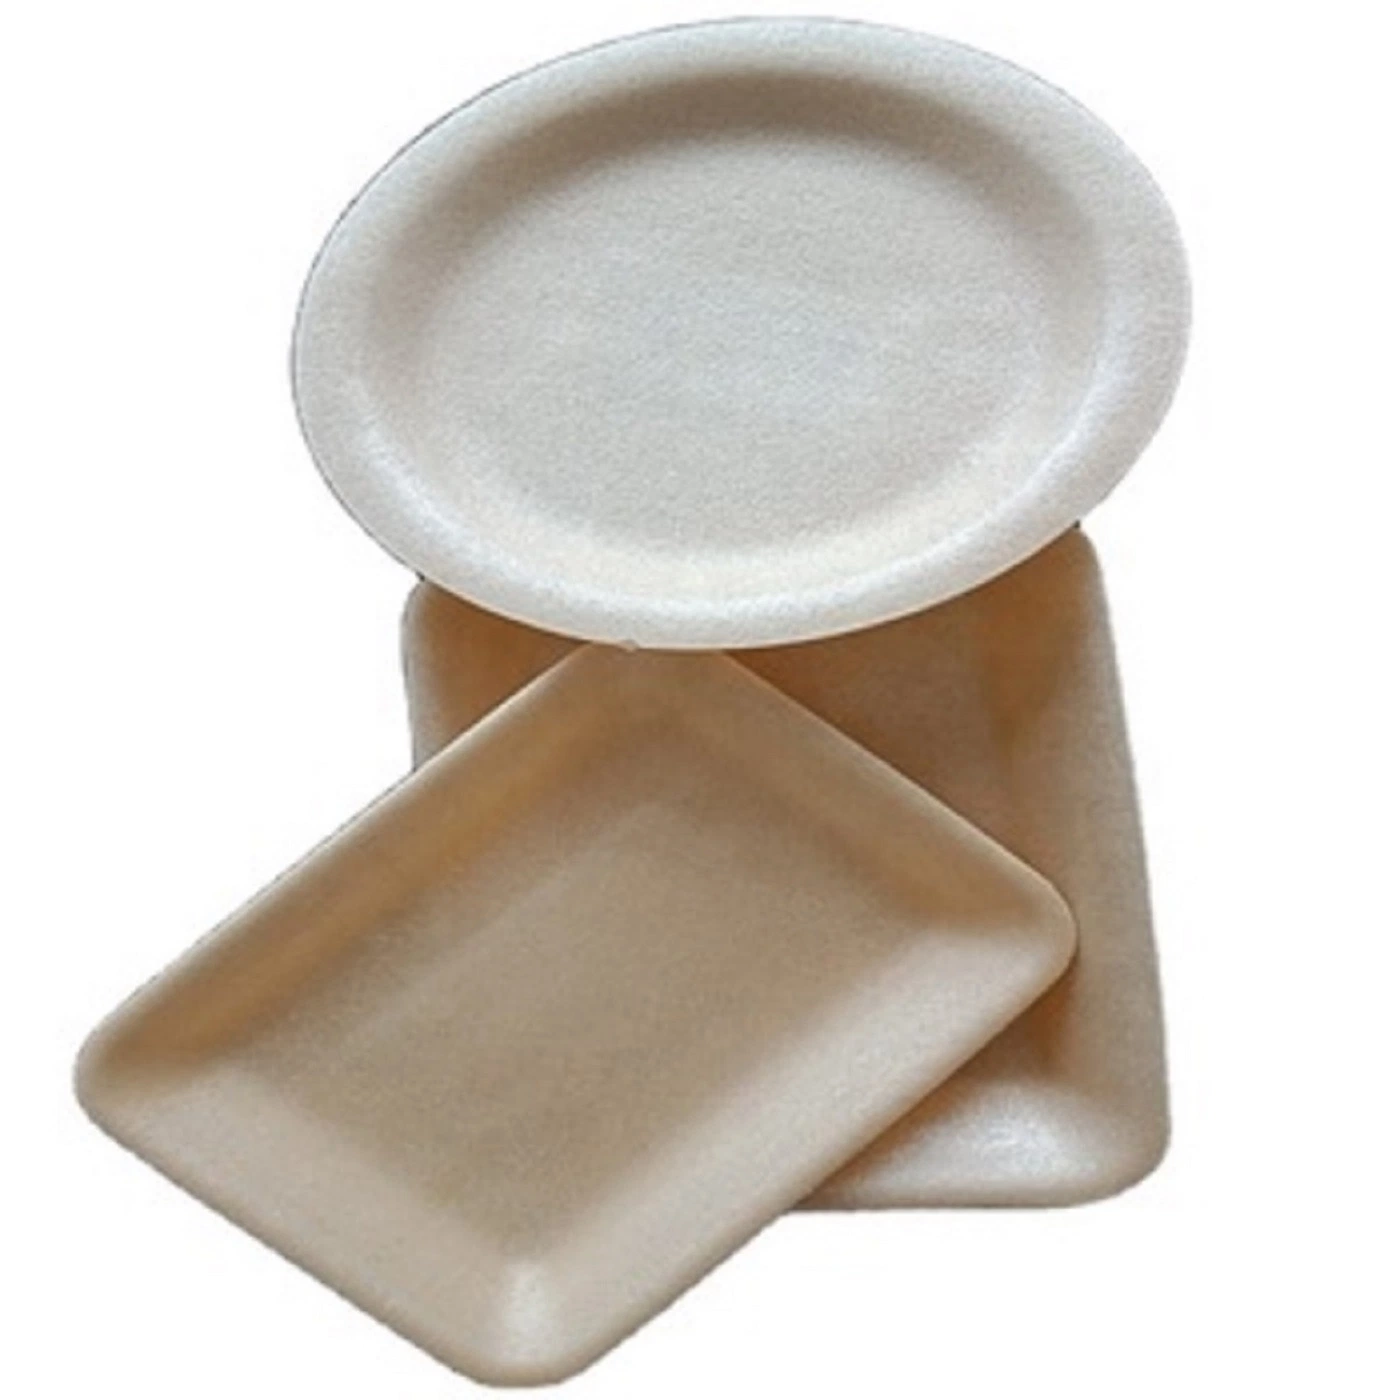 New Product Material Plastic for Food Packaging Apple Tray